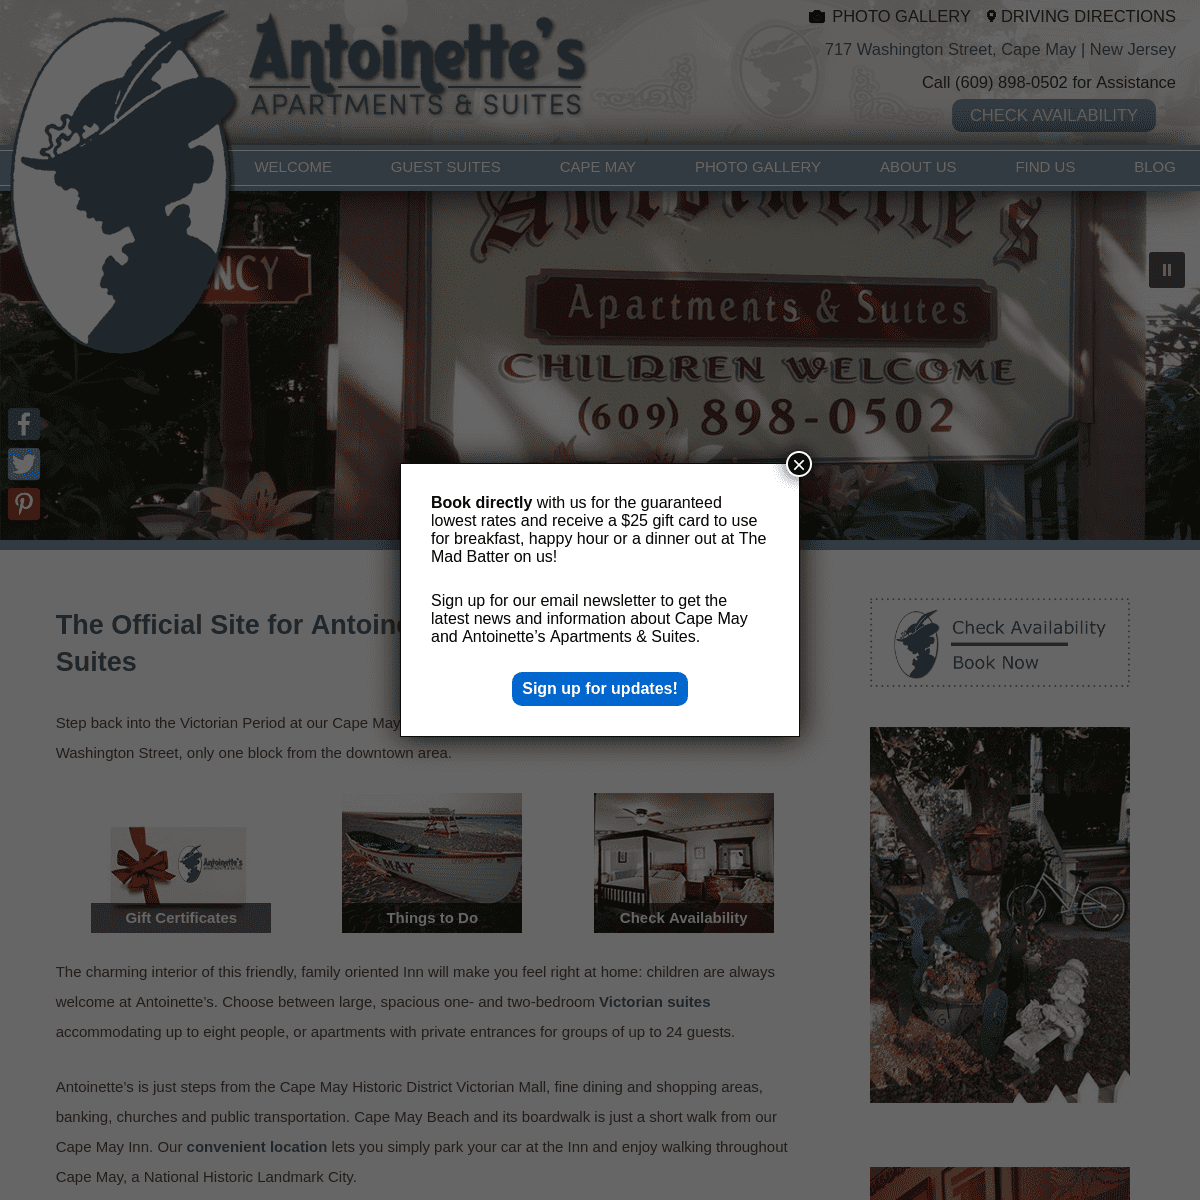 Antoinette's Apartments & Suites Official Site Lodging in Cape May NJ